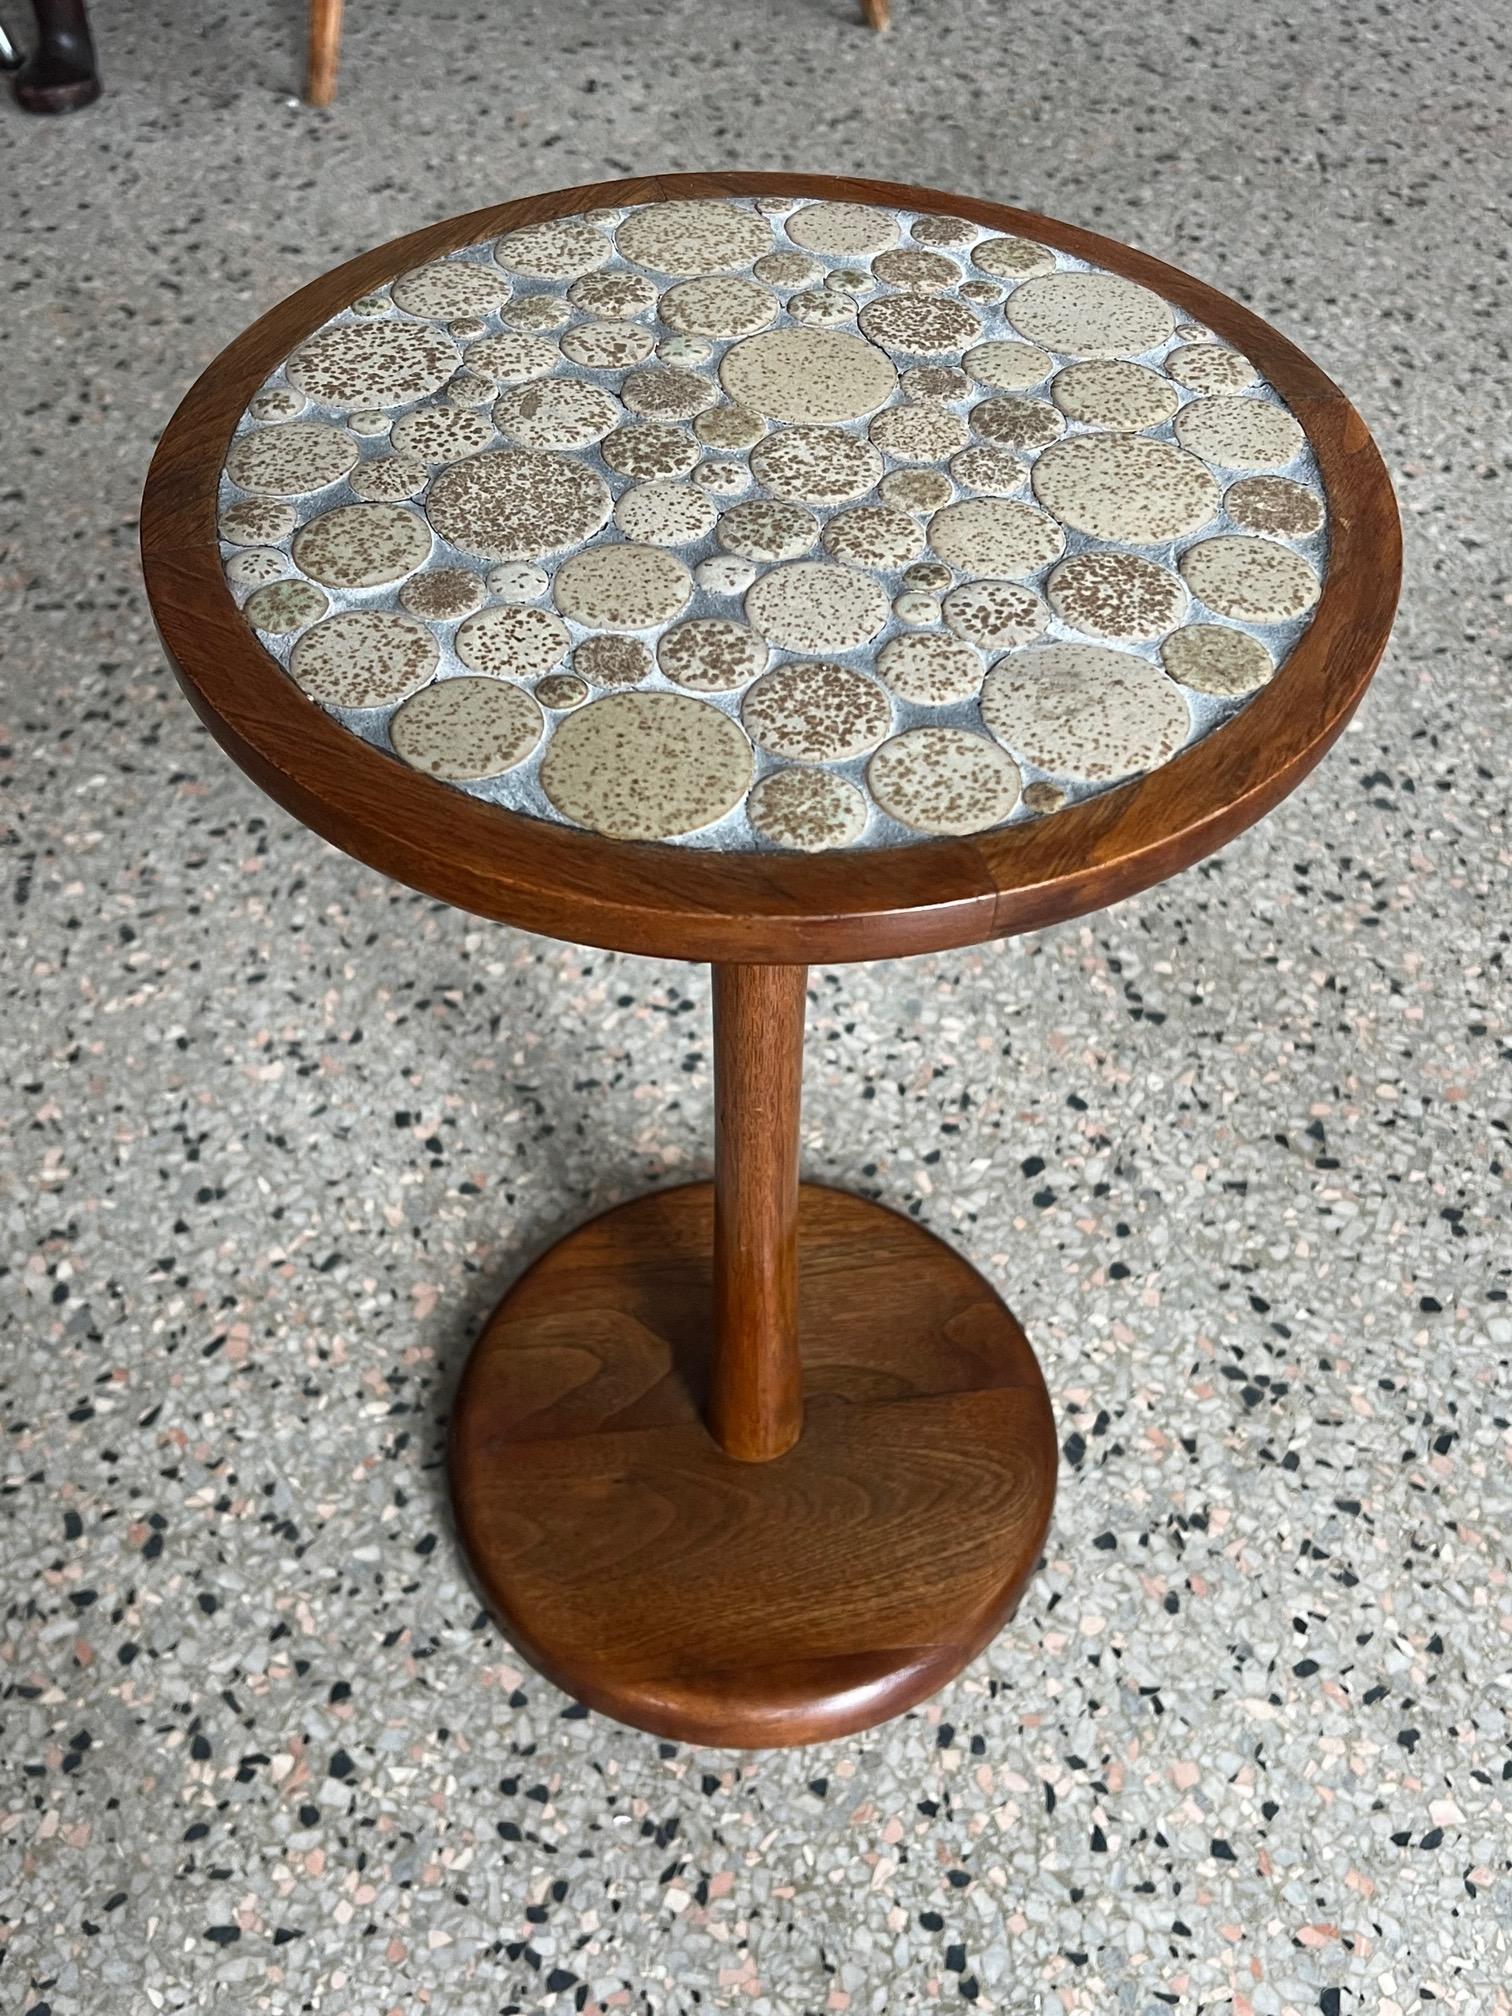 Ceramic coin shaped tile top side table, designed by Jane and Gordon Martz for Marshall Studio. Beautiful turned walnut pedestal frame with inlaid ceramic round top. The Martz's are known for their ceramic mosaics and this occasional table is a very